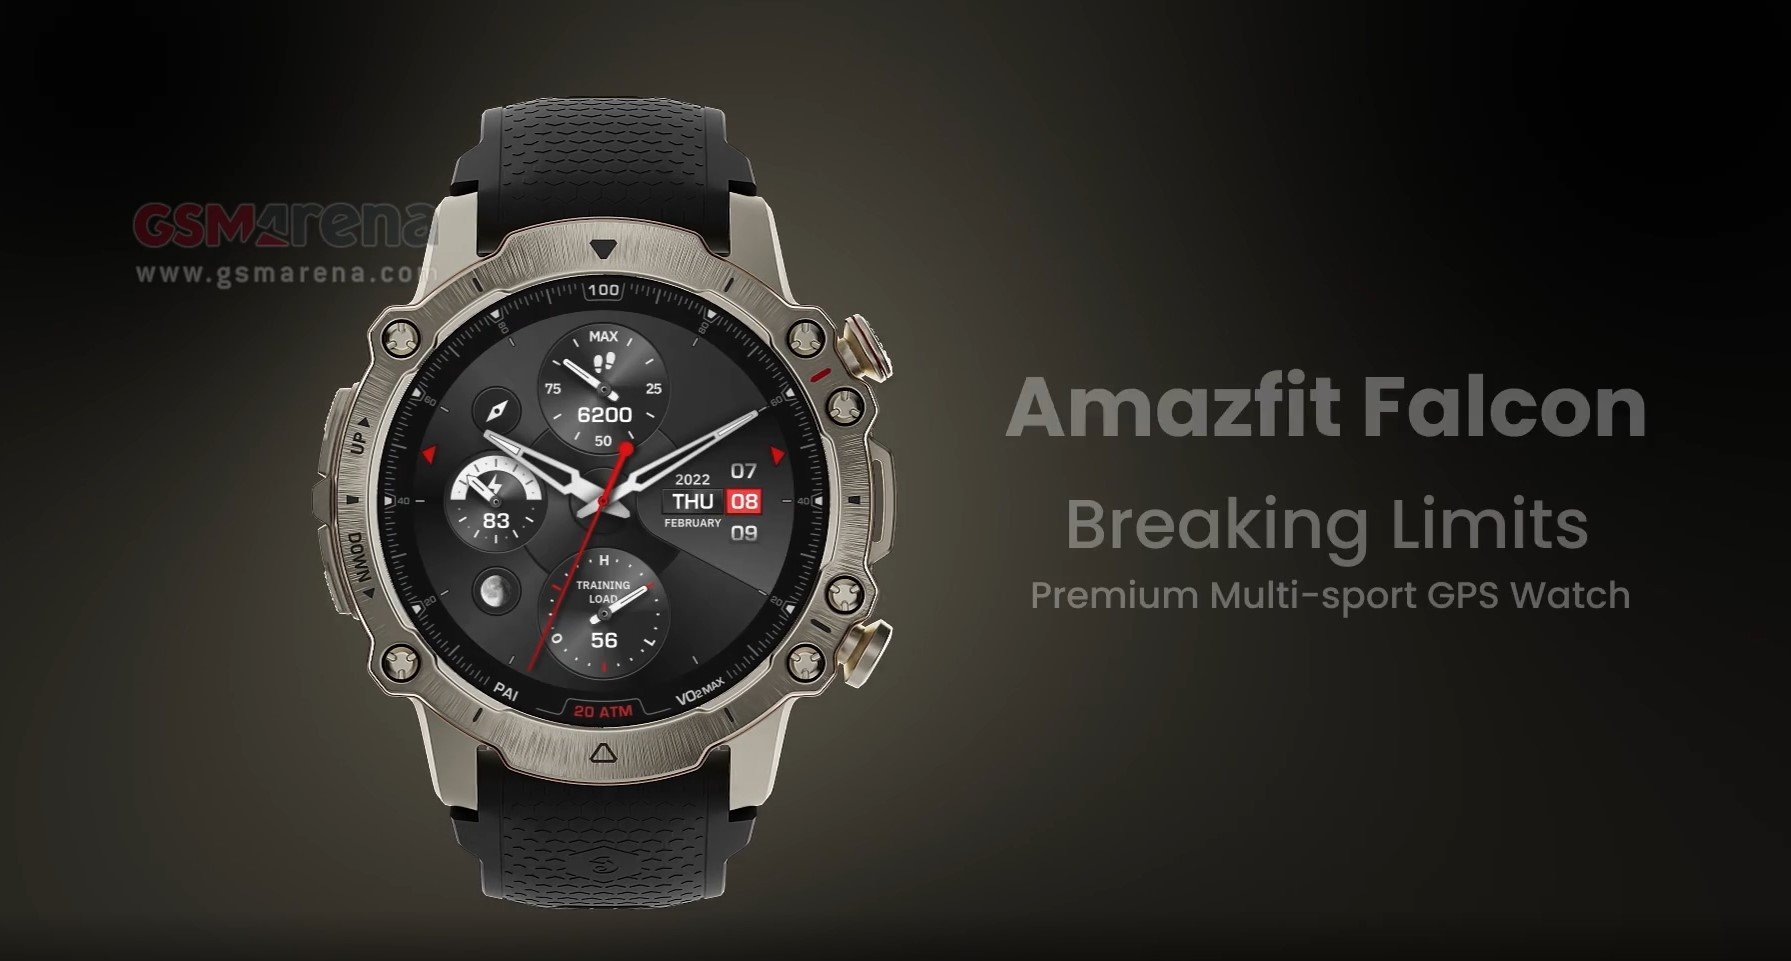 Amazfit Falcon will launch earlier on October 13